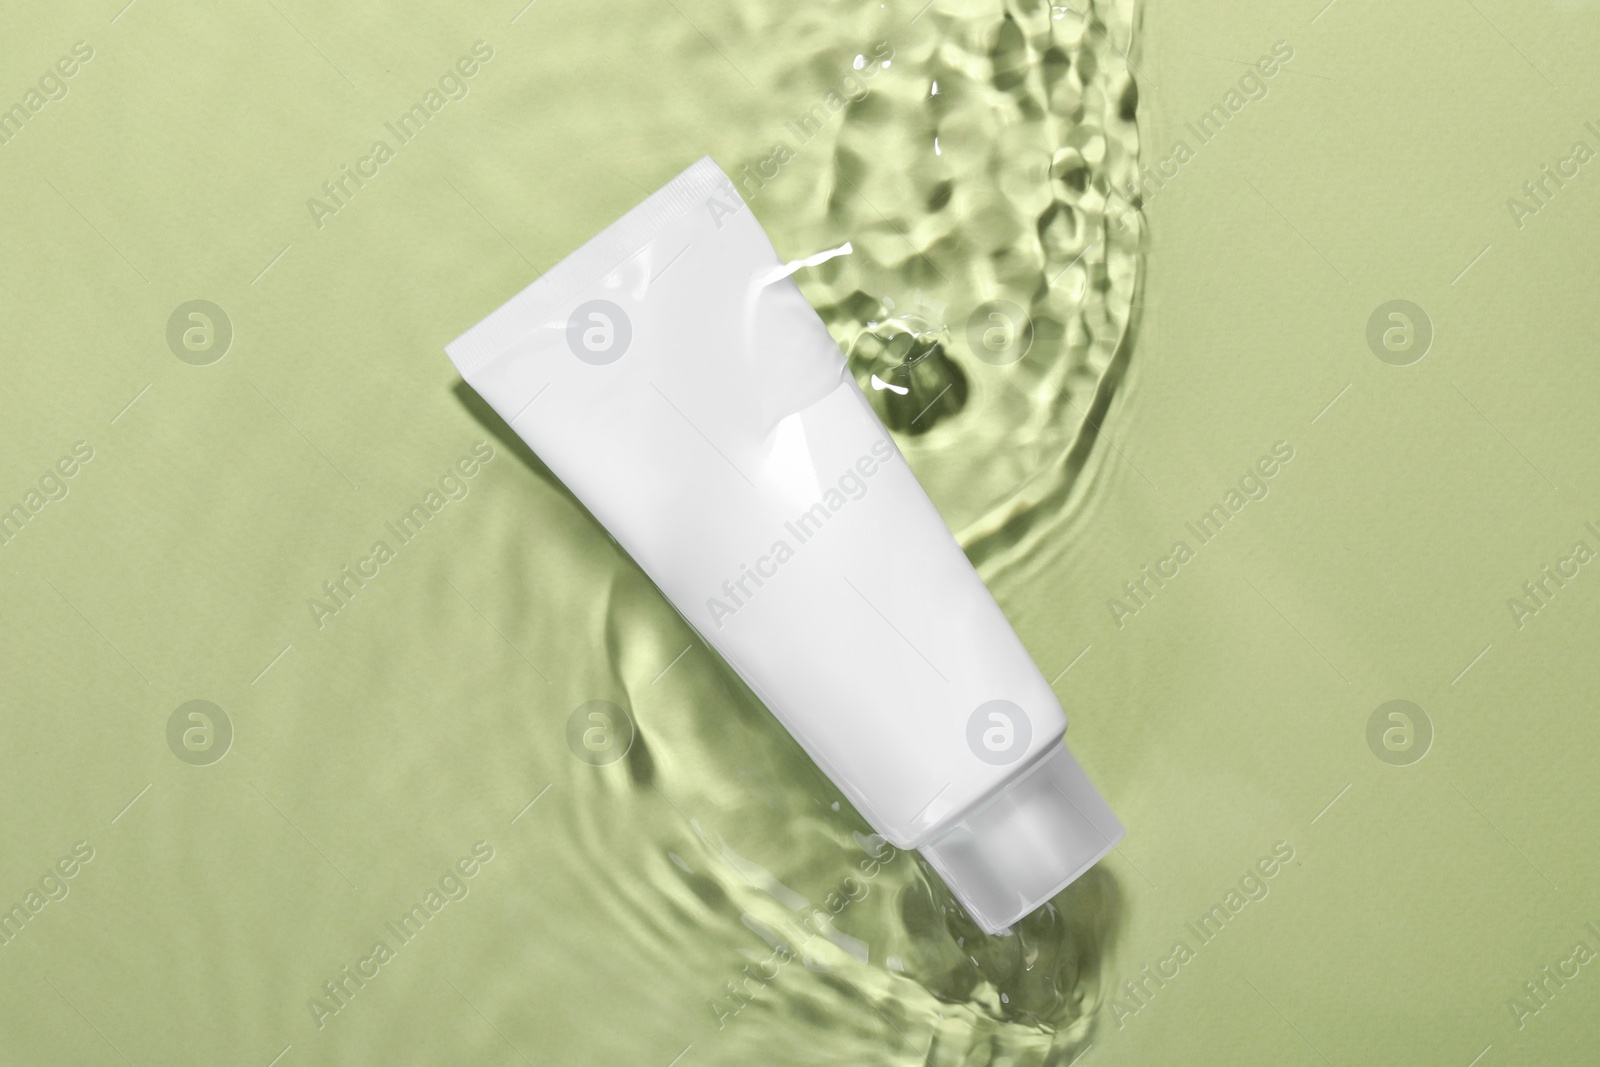 Photo of Tube of facial cleanser in water against olive background, top view